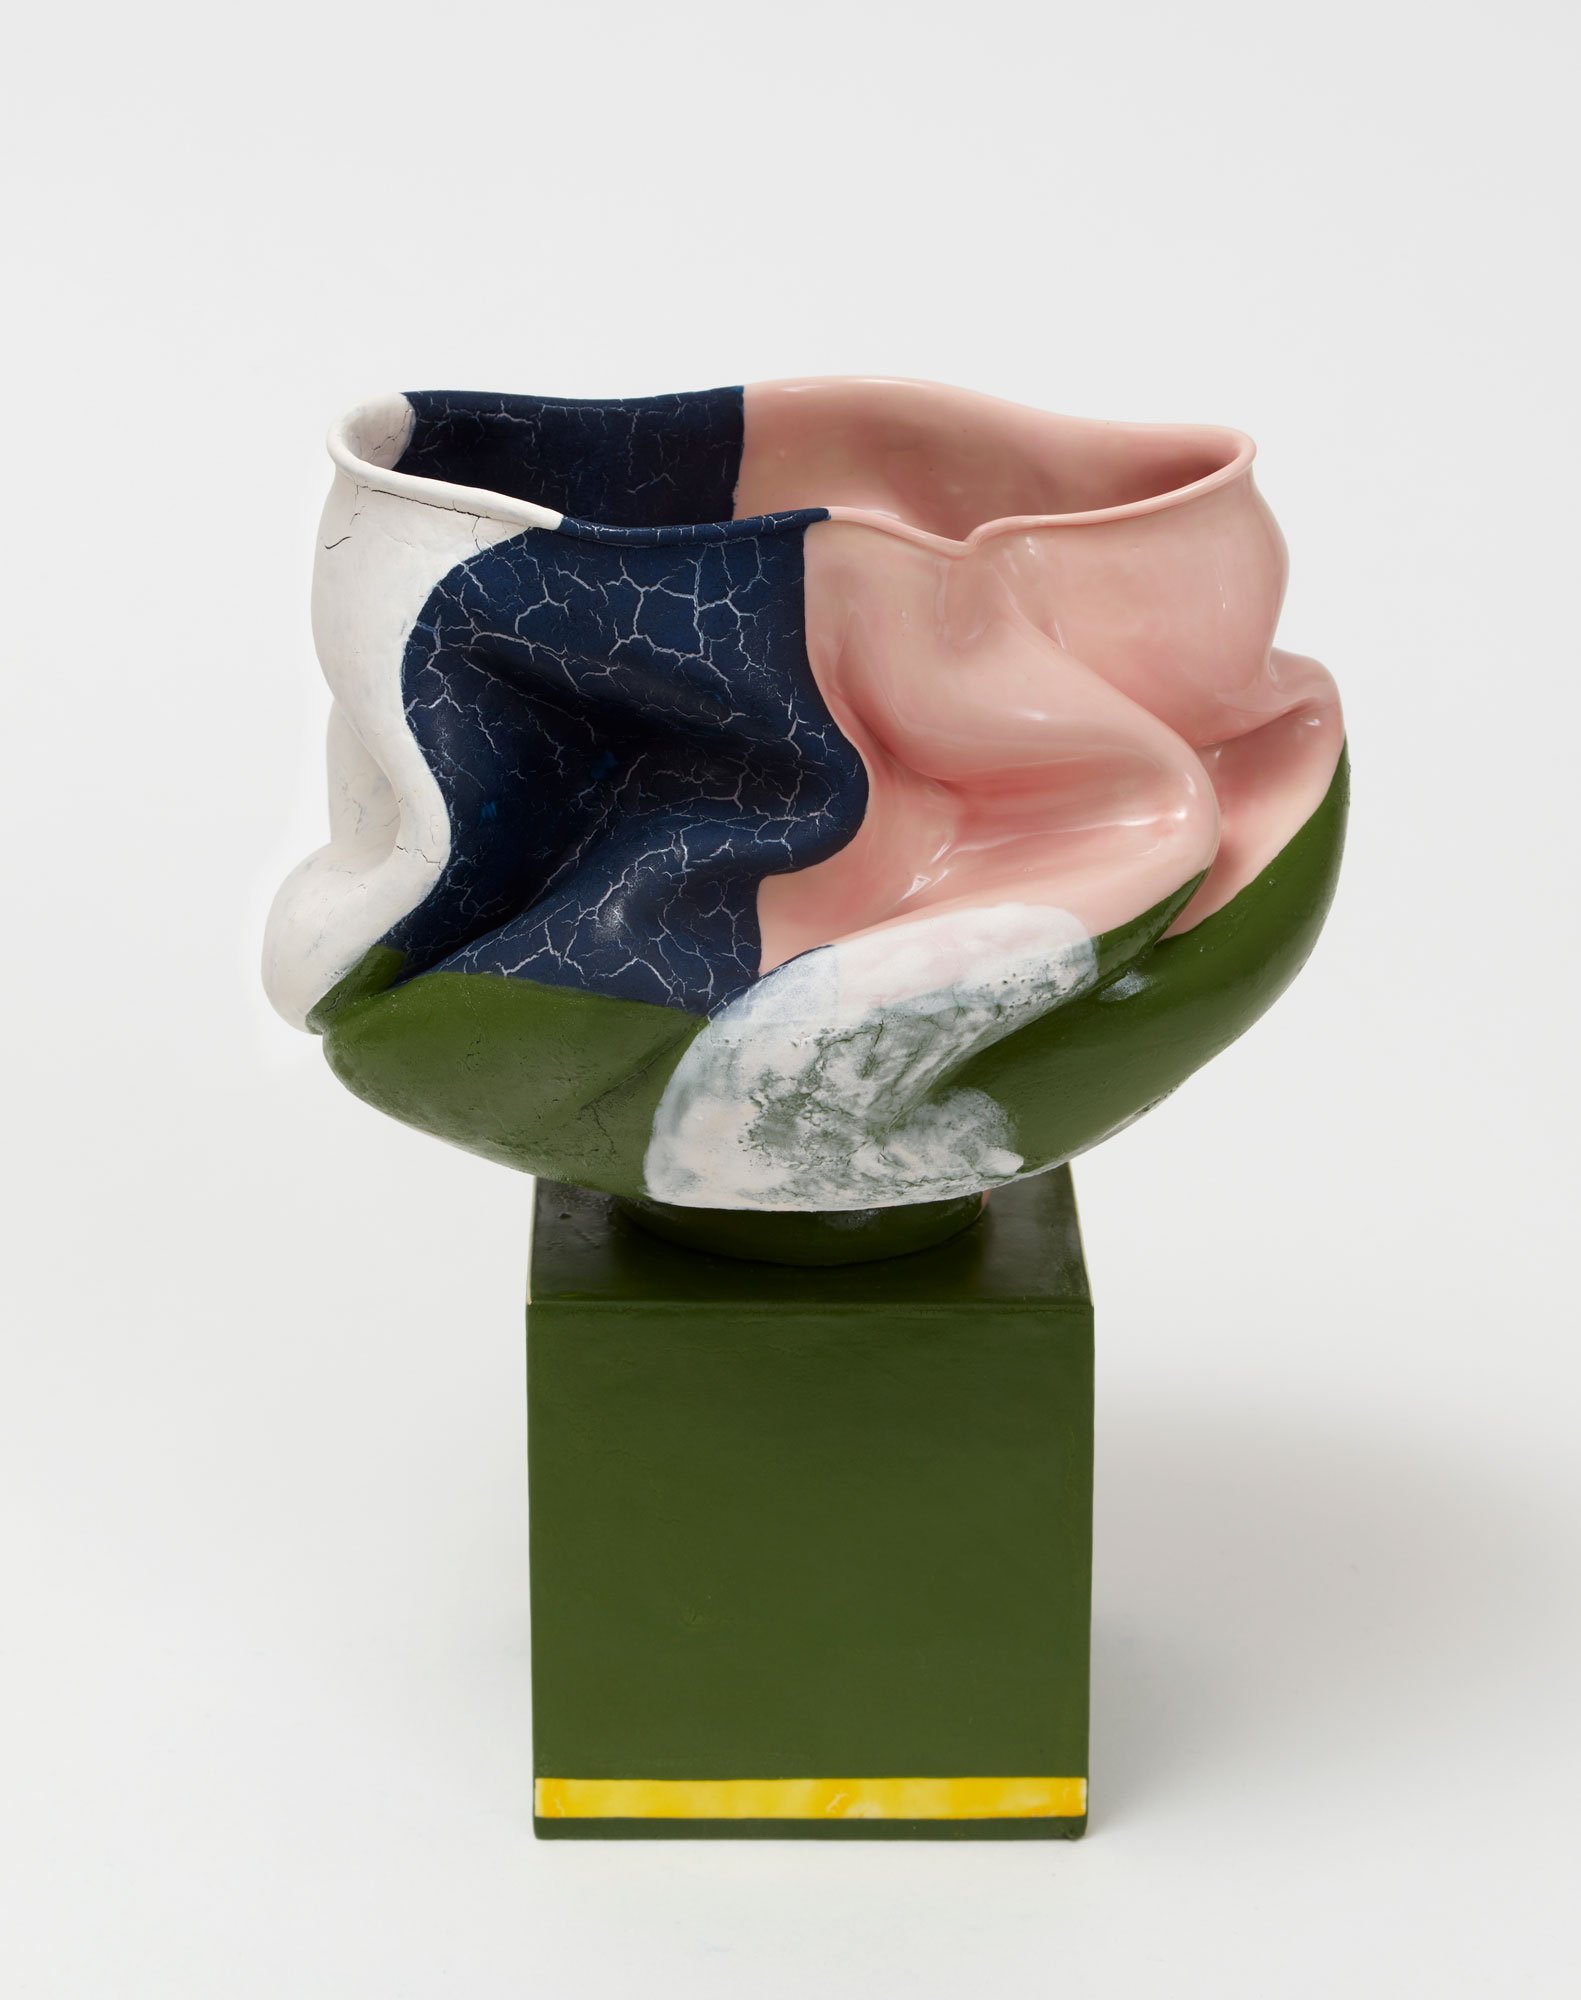  Kathy Butterly (United States, born 1963),  Super Green , 2021, porcelain, earthenware, glaze, approximately 6 x 7 x 5 inches. Courtesy of James Cohan Gallery, New York. © Kathy Butterly. Image courtesy the artist and James Cohan, New York. Photo: A